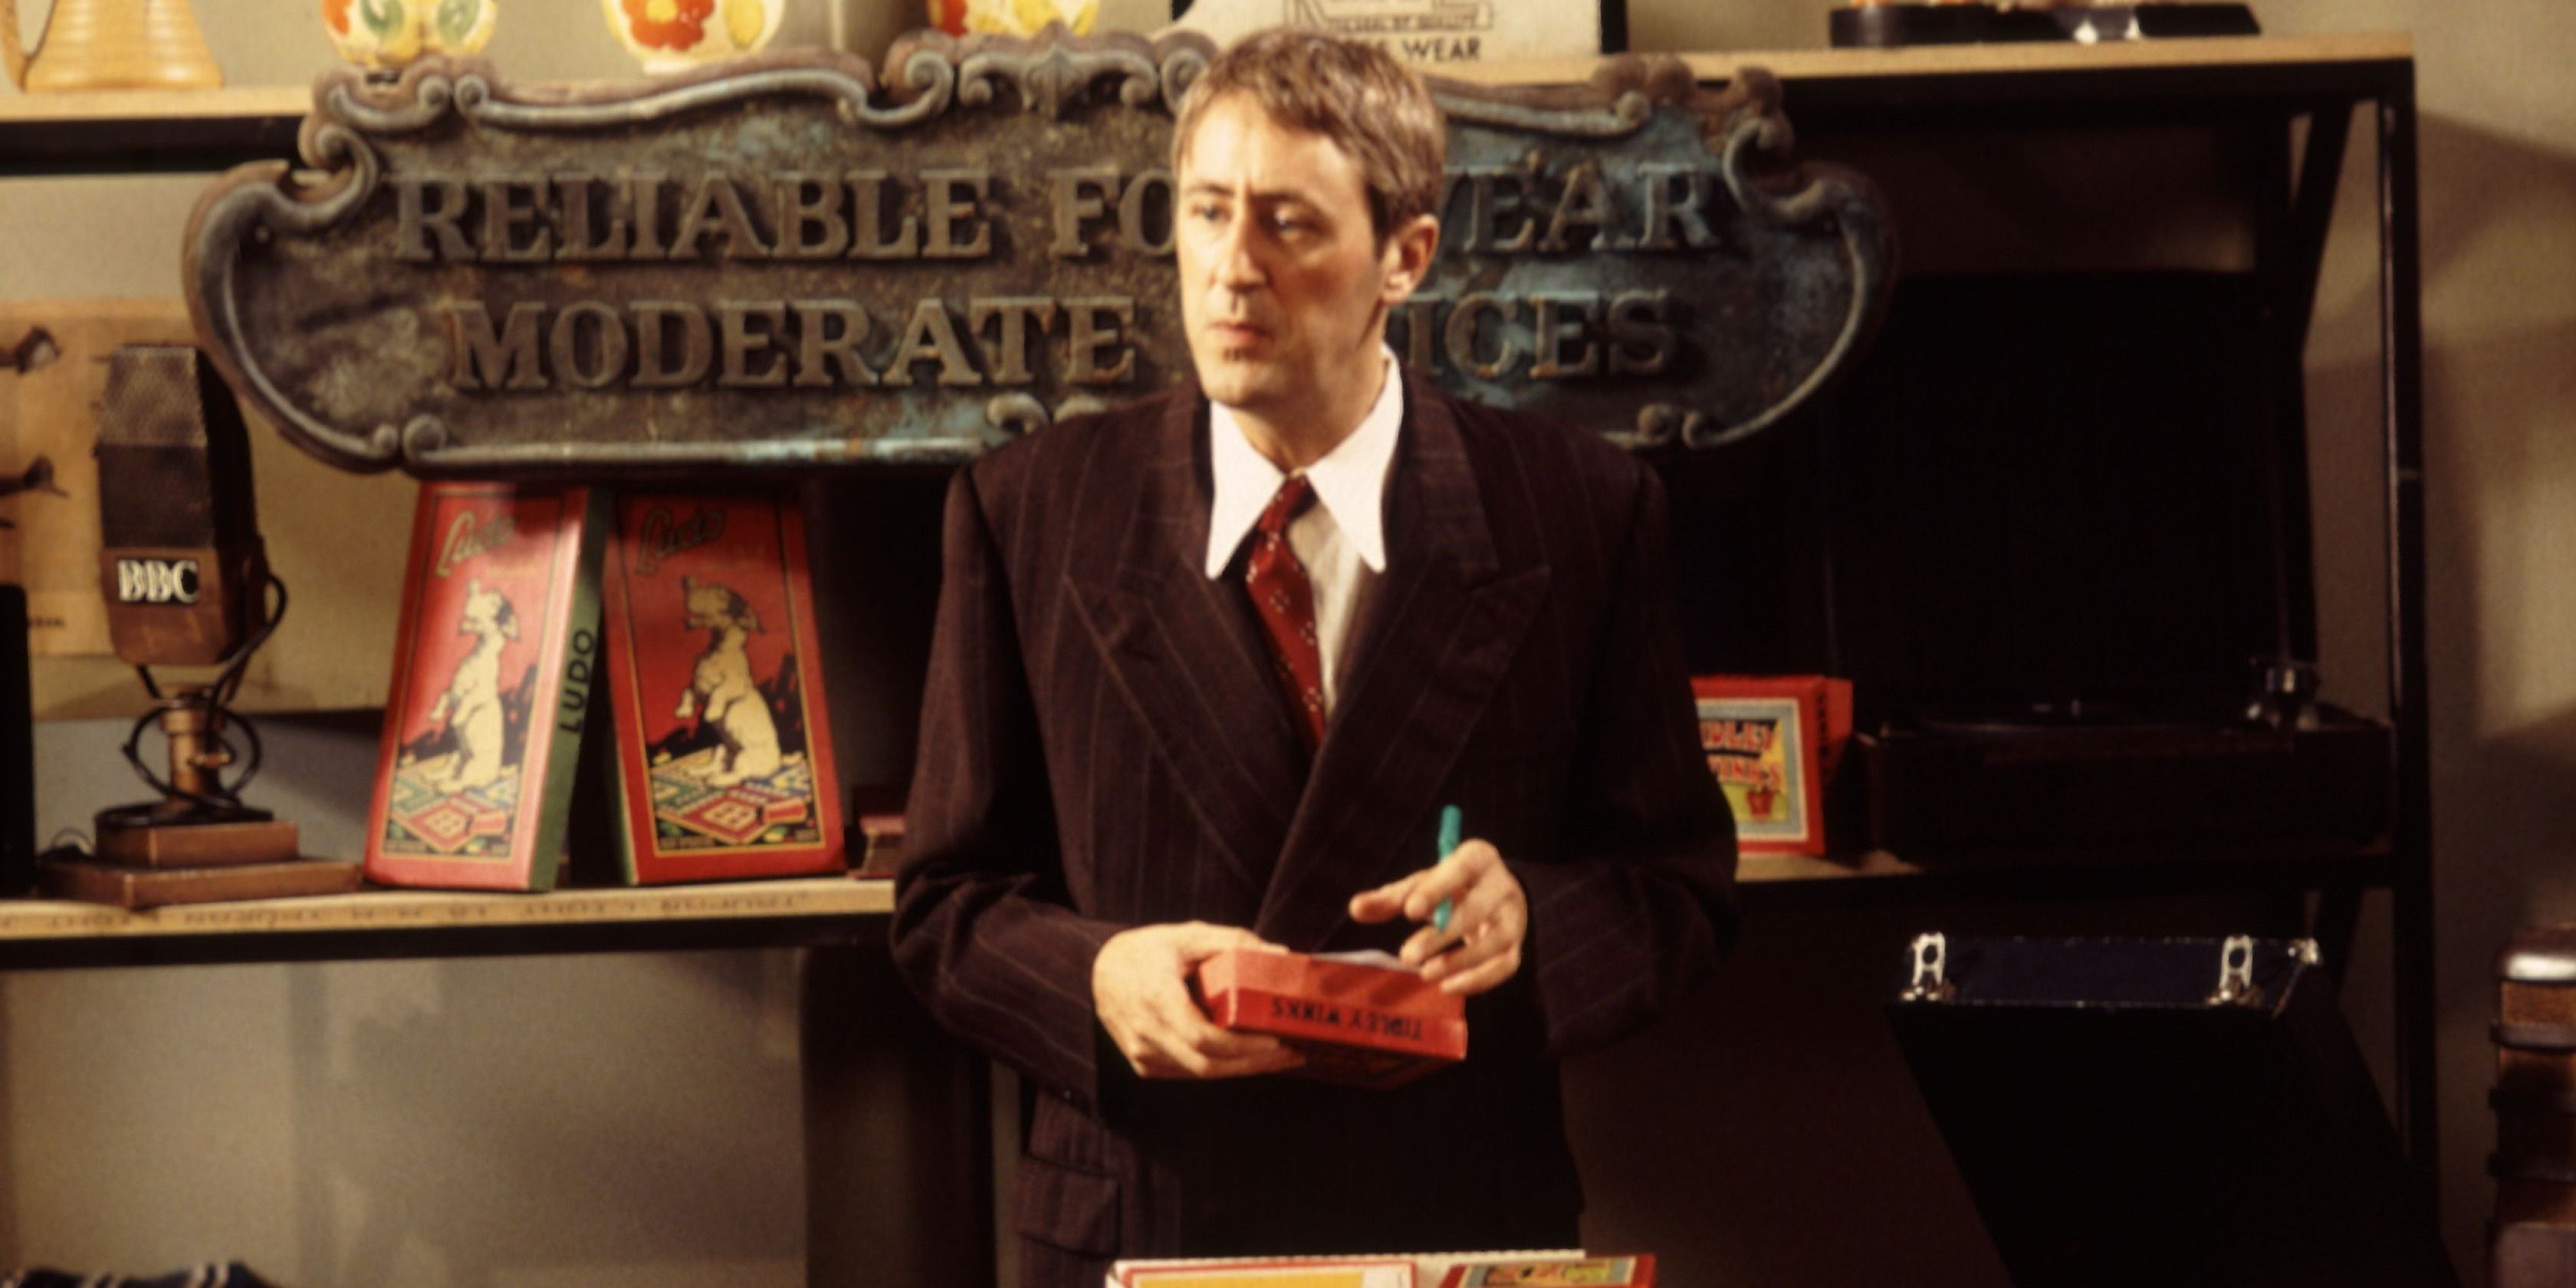 Gary Sparrow stands behind the counter in his wartime antiques shop in Goodnight Sweetheart.